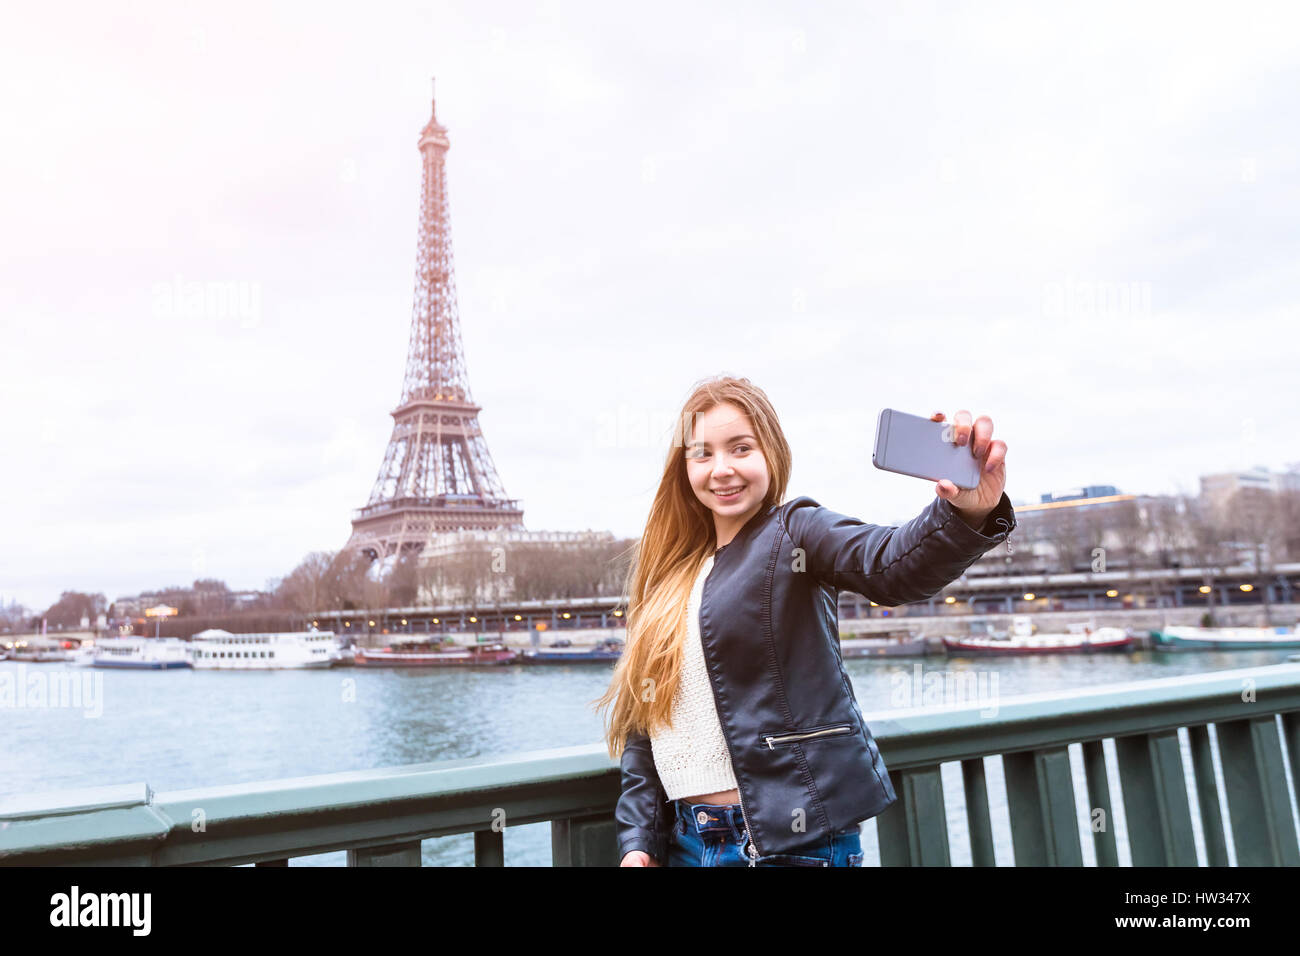 Pretty tourist girl taking a selfie photo of herself in front of Eiffel Tower in Paris Stock Photo